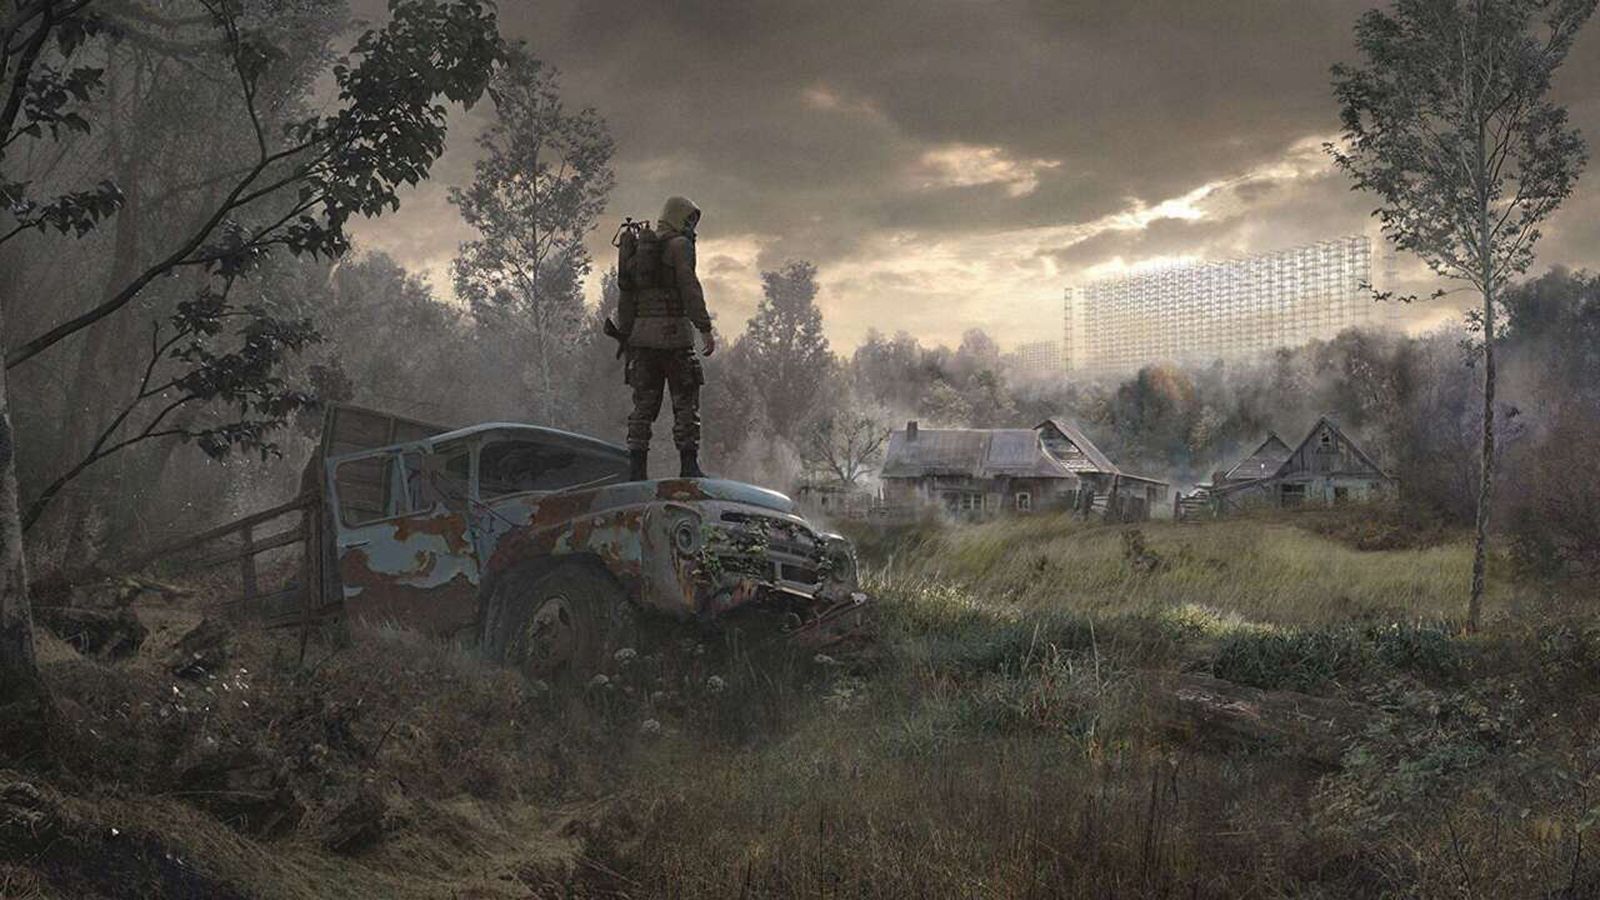 STALKER 2 player standing on top of rusty car